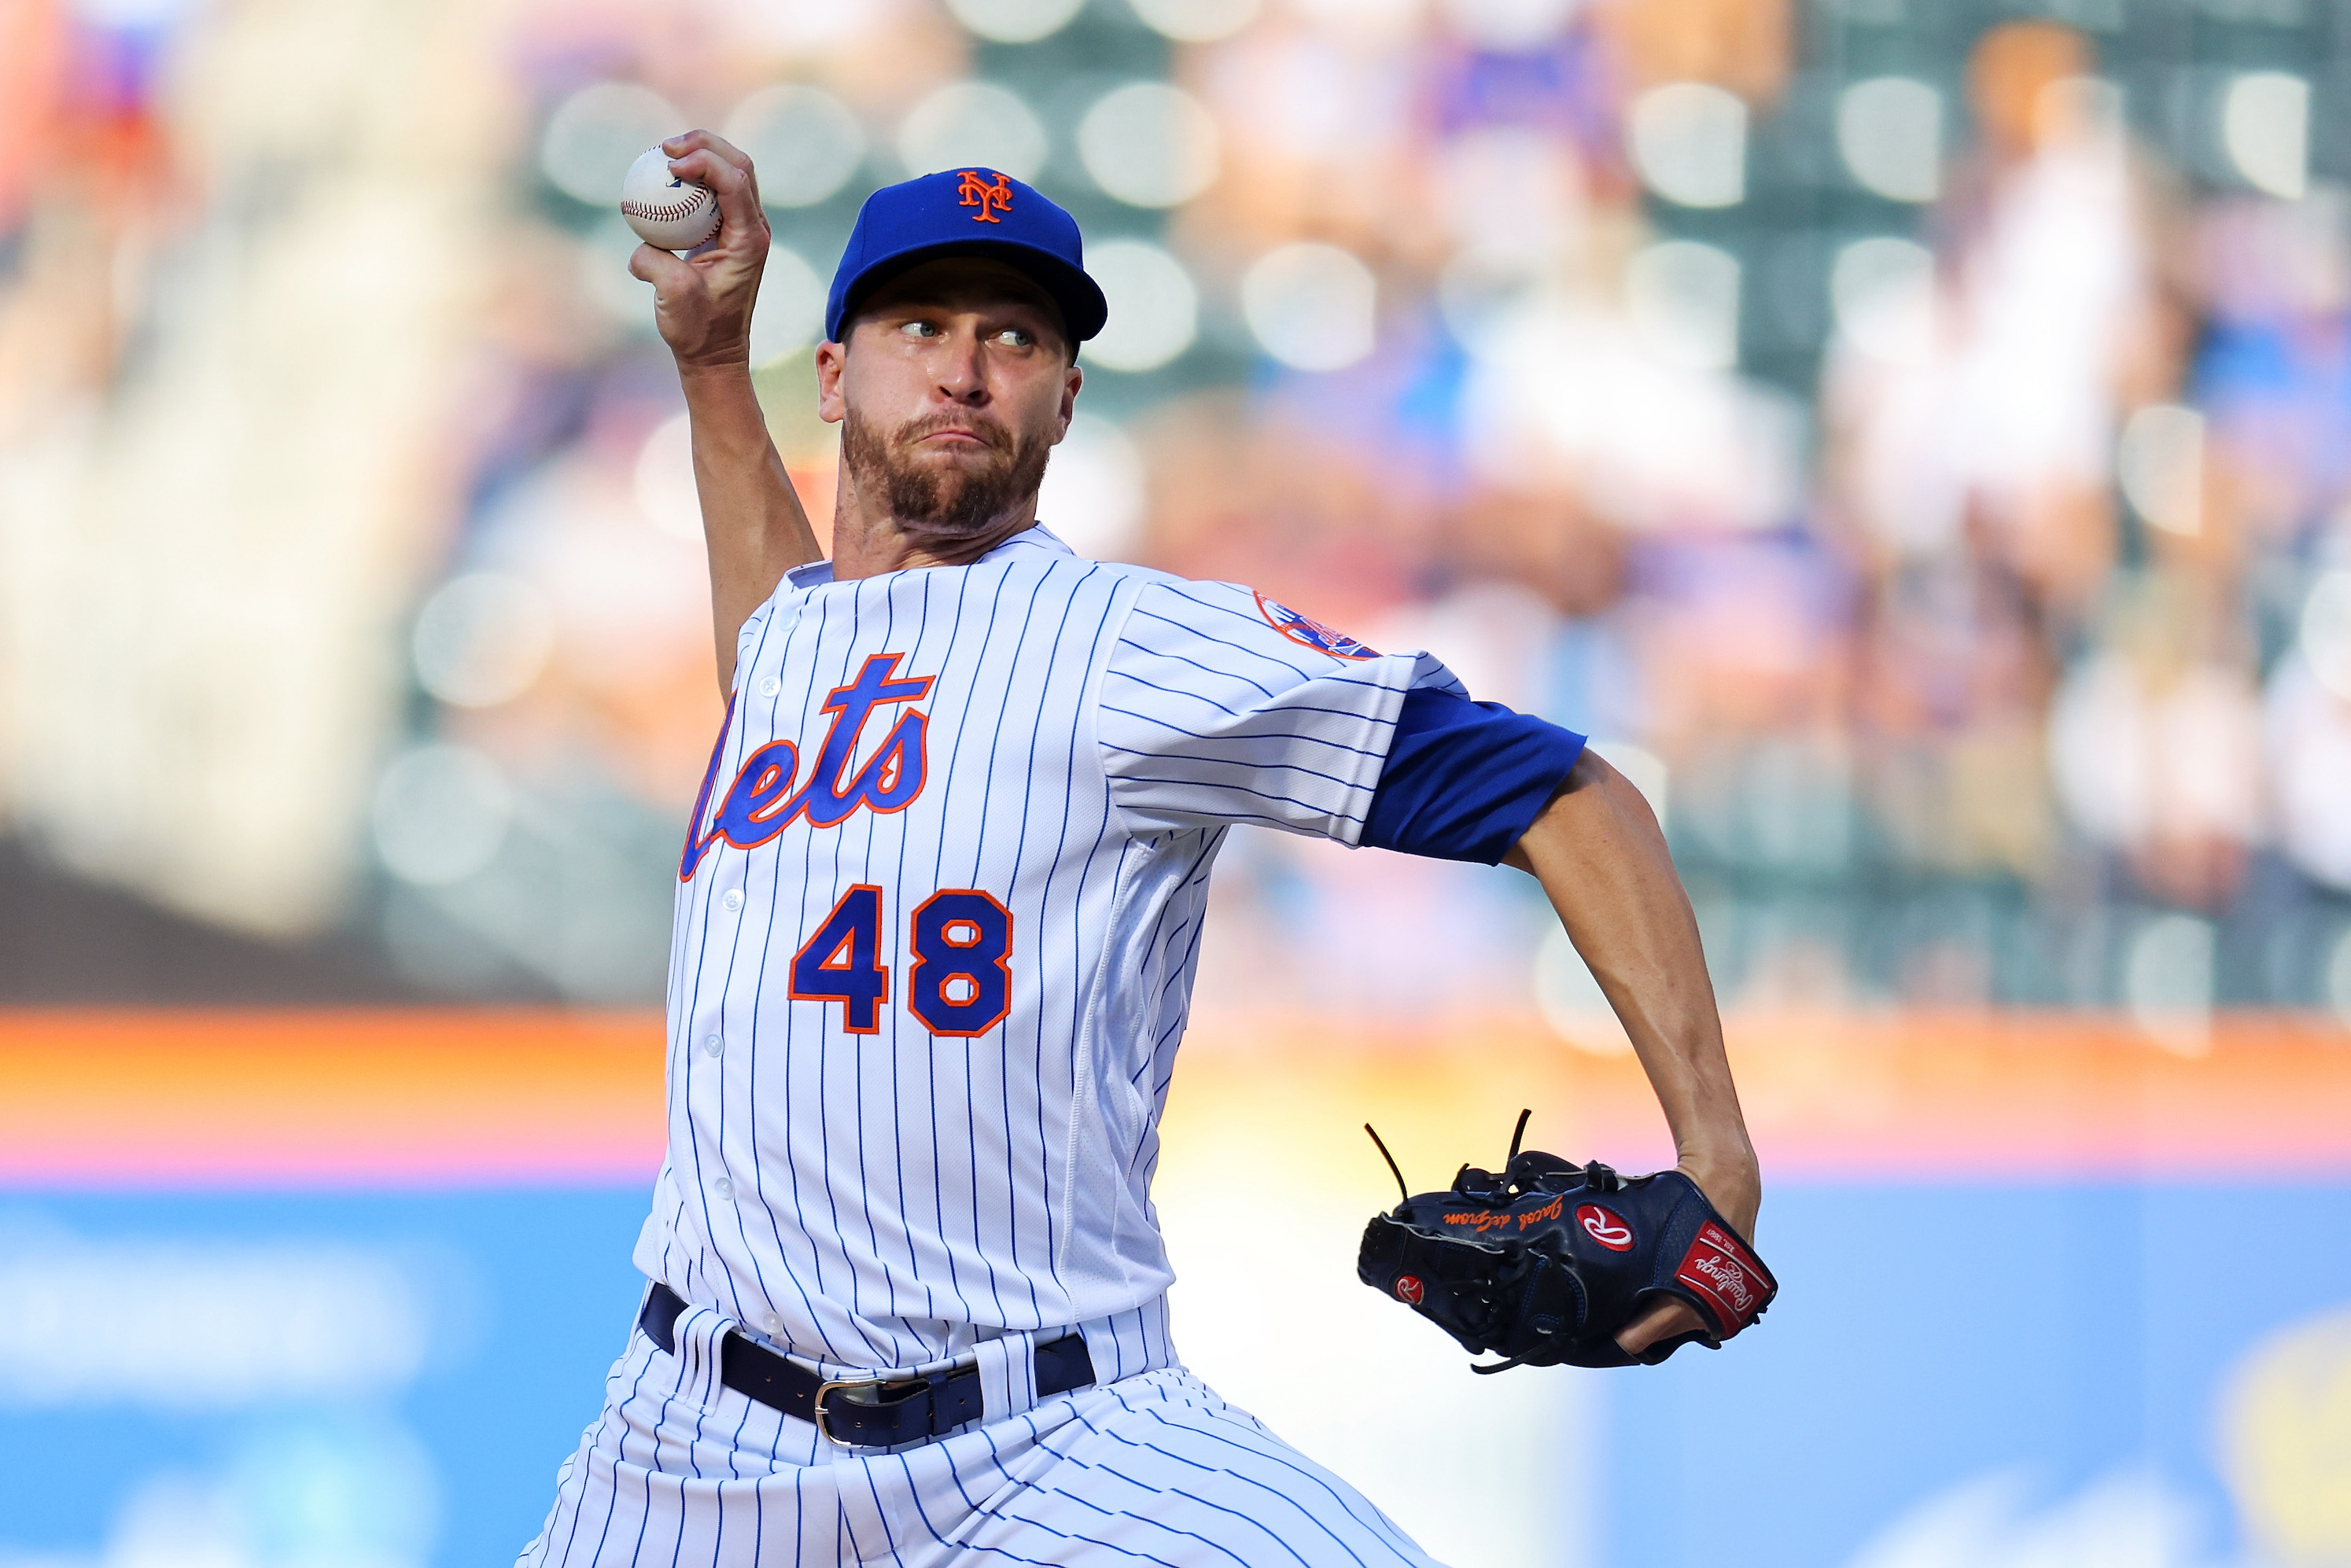 Jacob deGrom's tightrope walk snaps in one meltdown inning